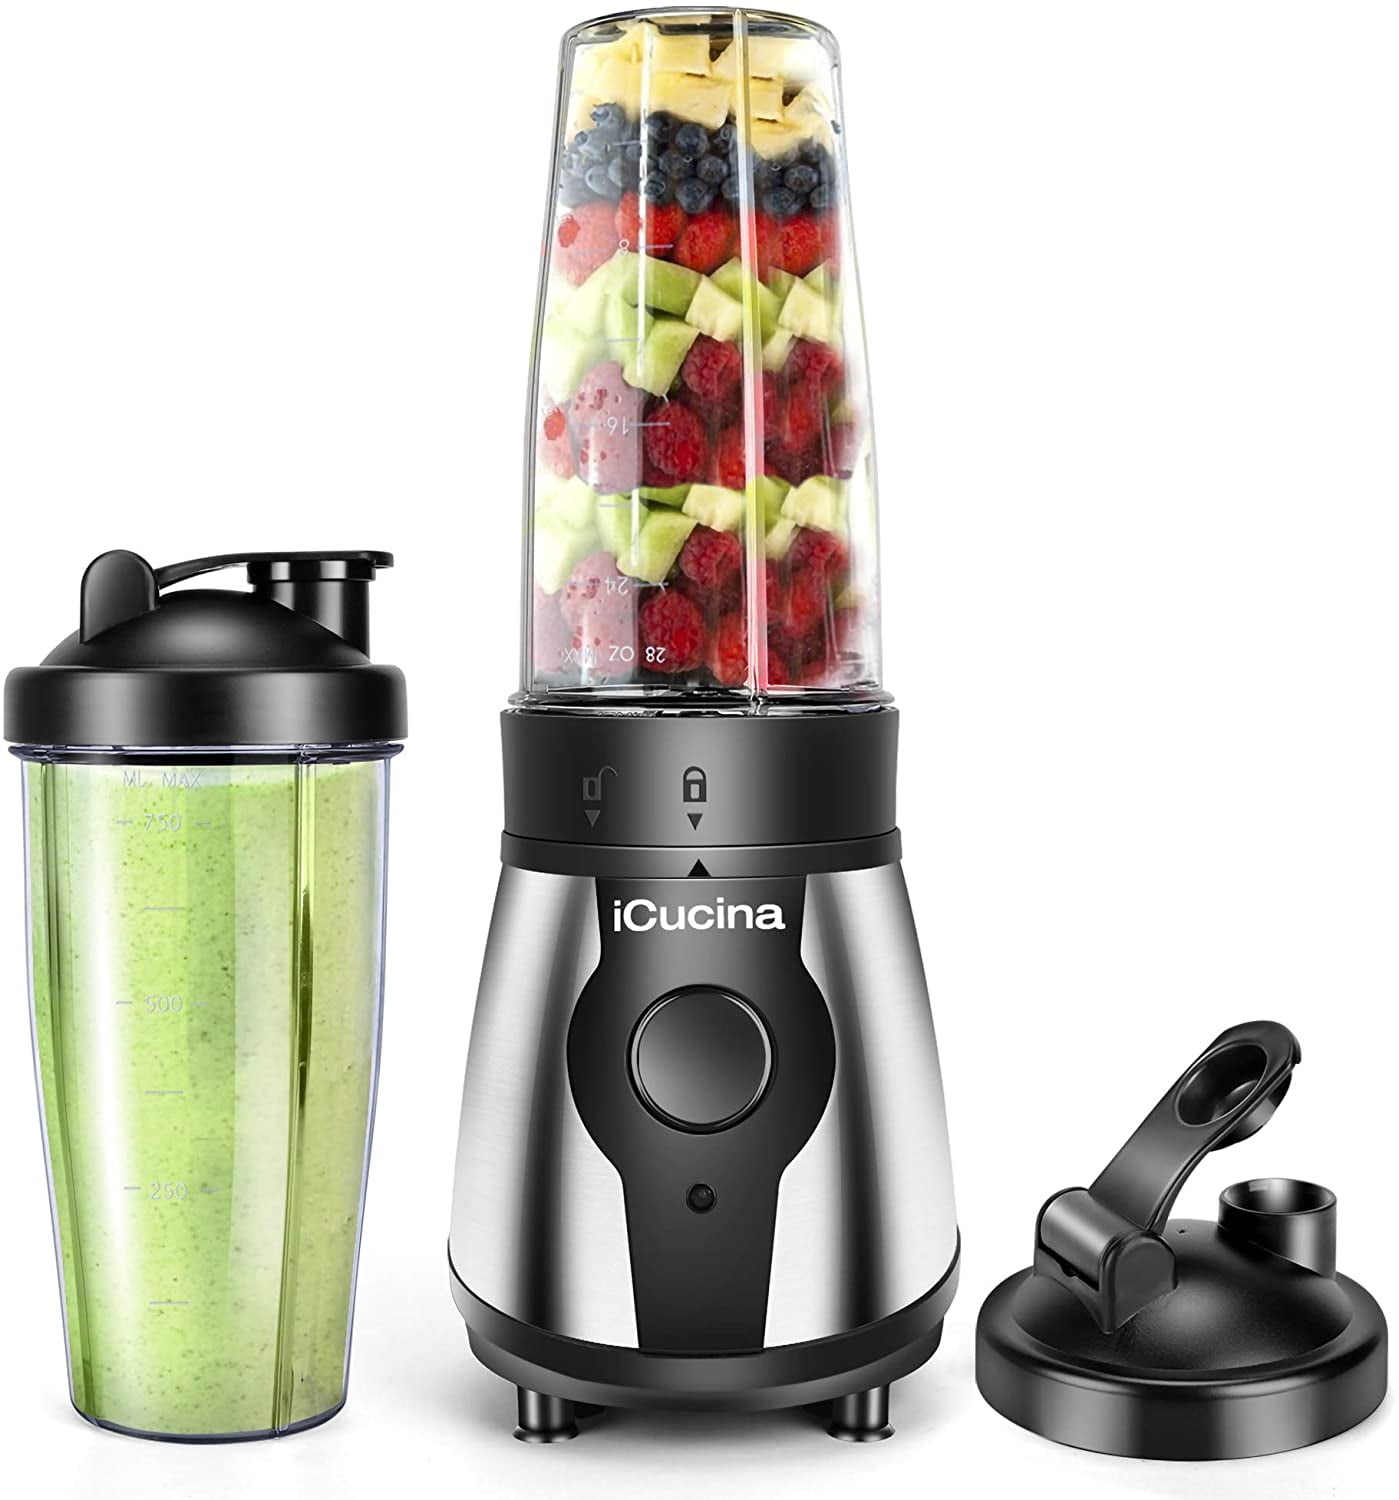 AiDot Ganiza 3-In-1 Portable Blender for Shakes and Smoothies